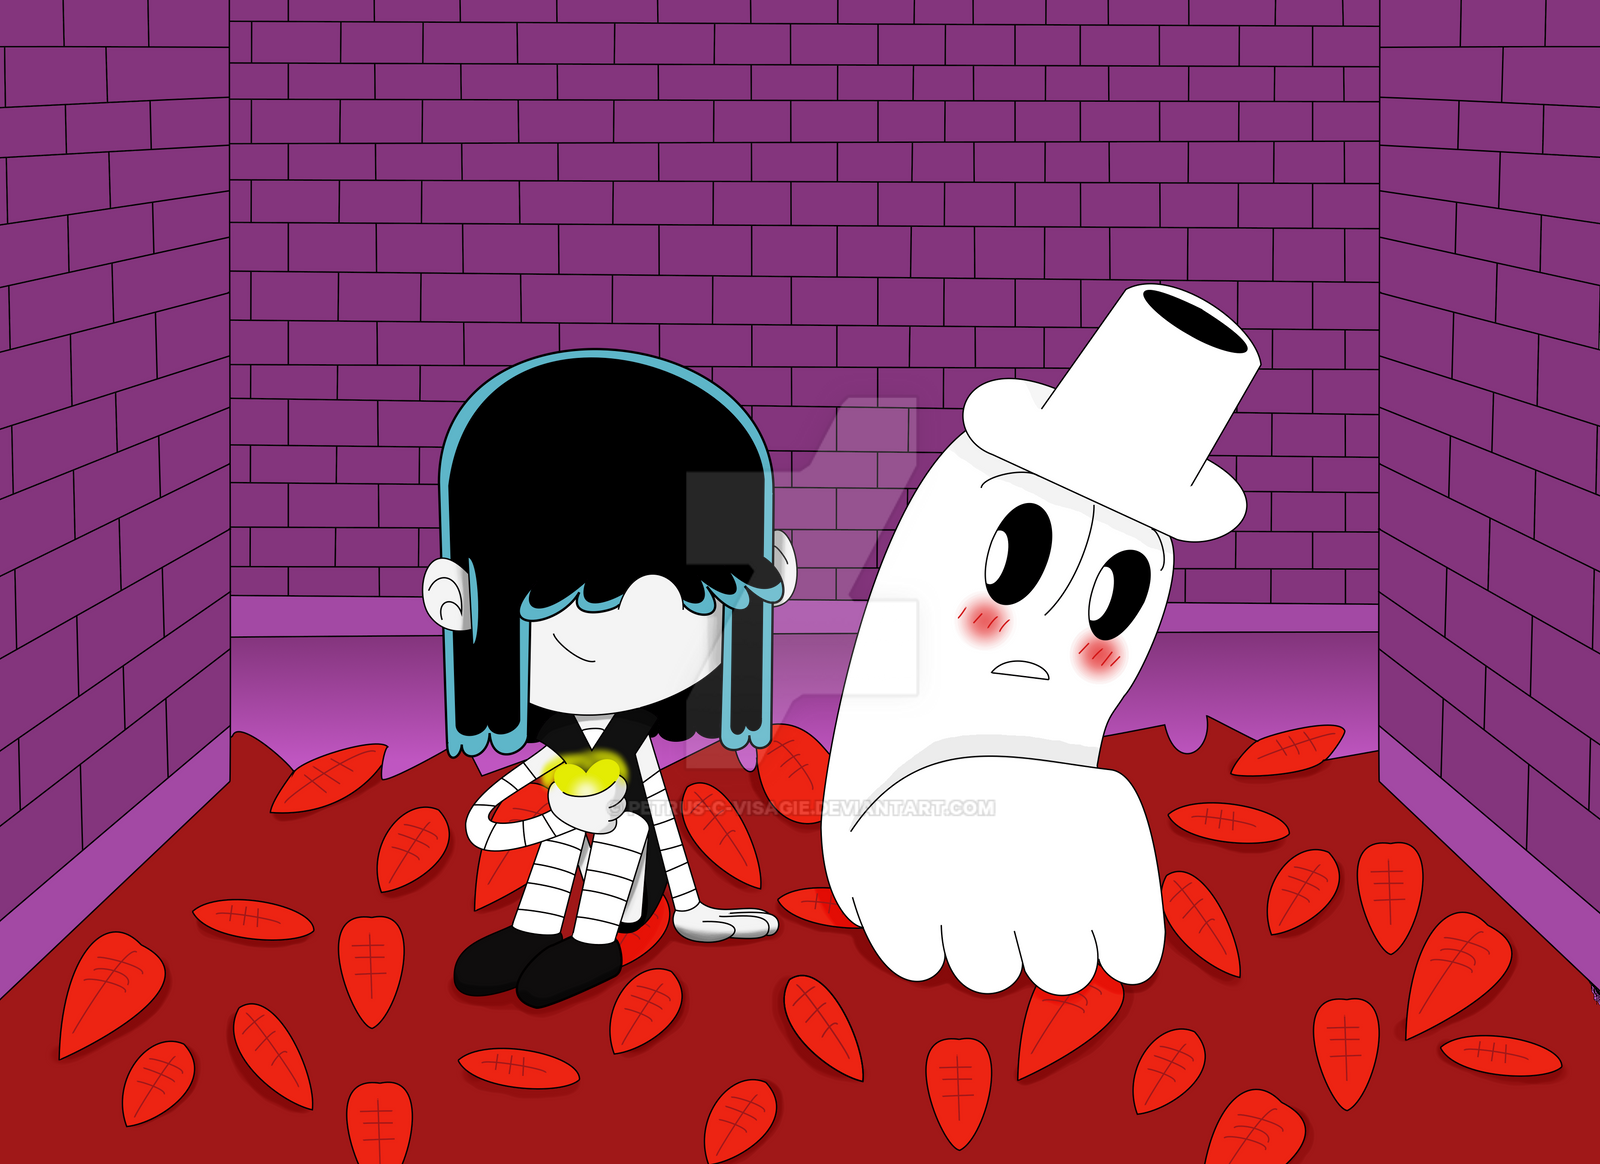 LOUDERTALE - Lucy and Napstablook